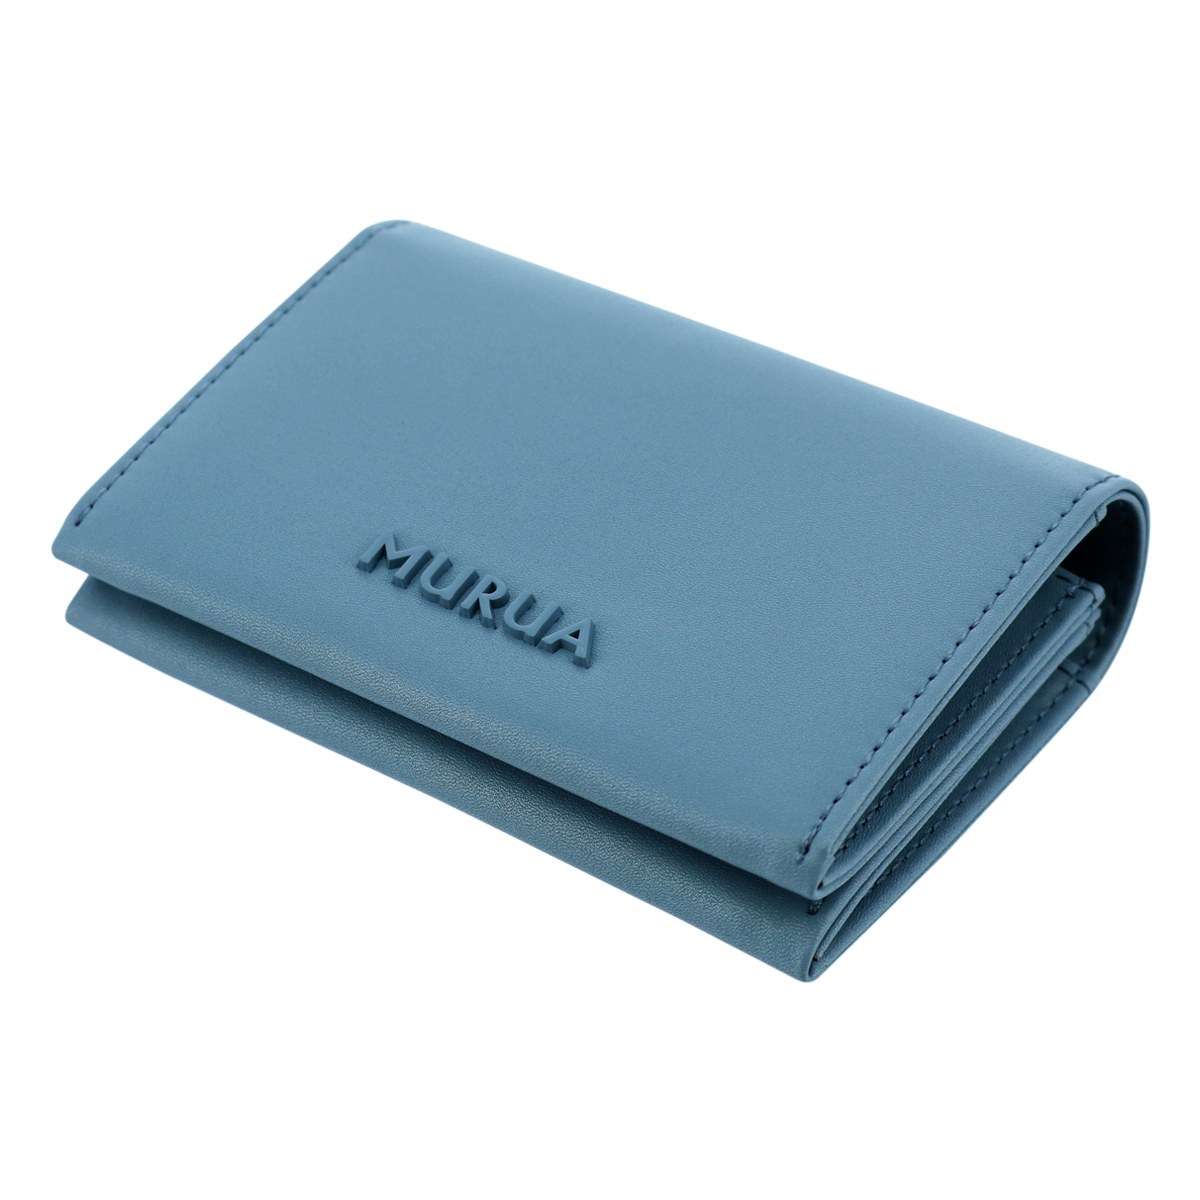 m Roo a card-case special order model lady's stylish simple MR-W904 MURUA our company limitation card-case _sale